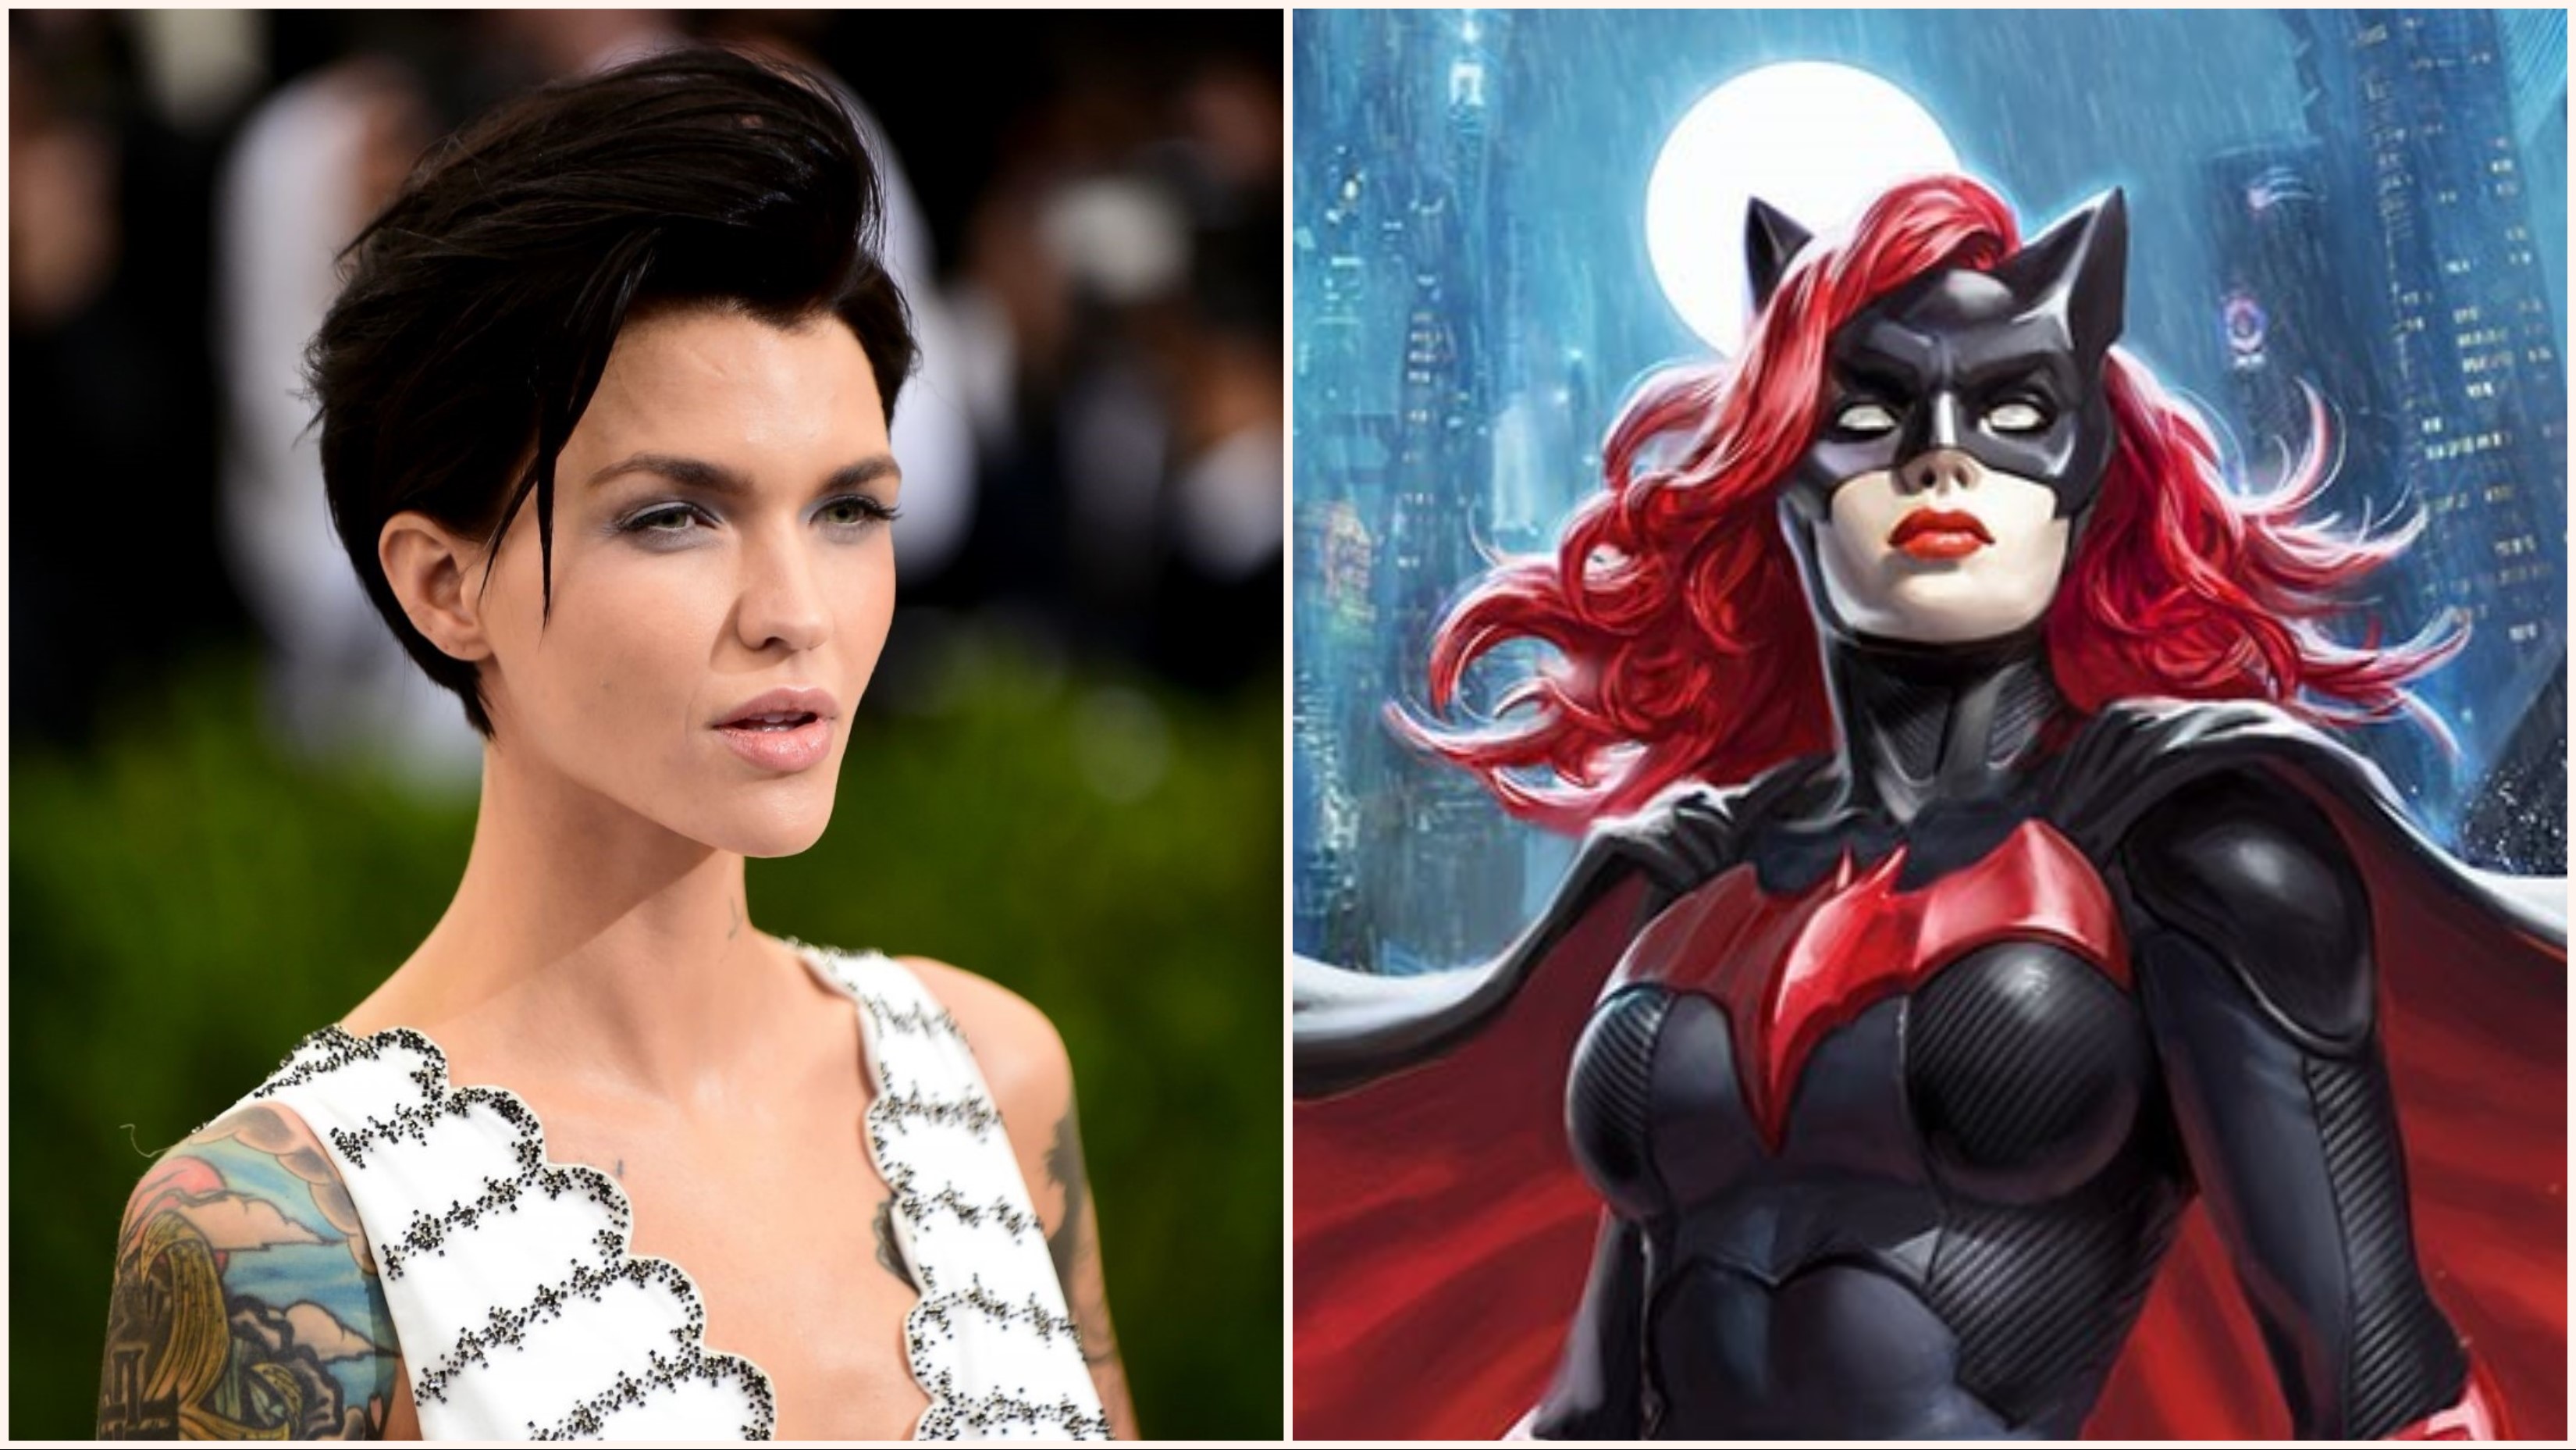 Ruby Rose has been cast as Kate Kane, also known as Batwoman.